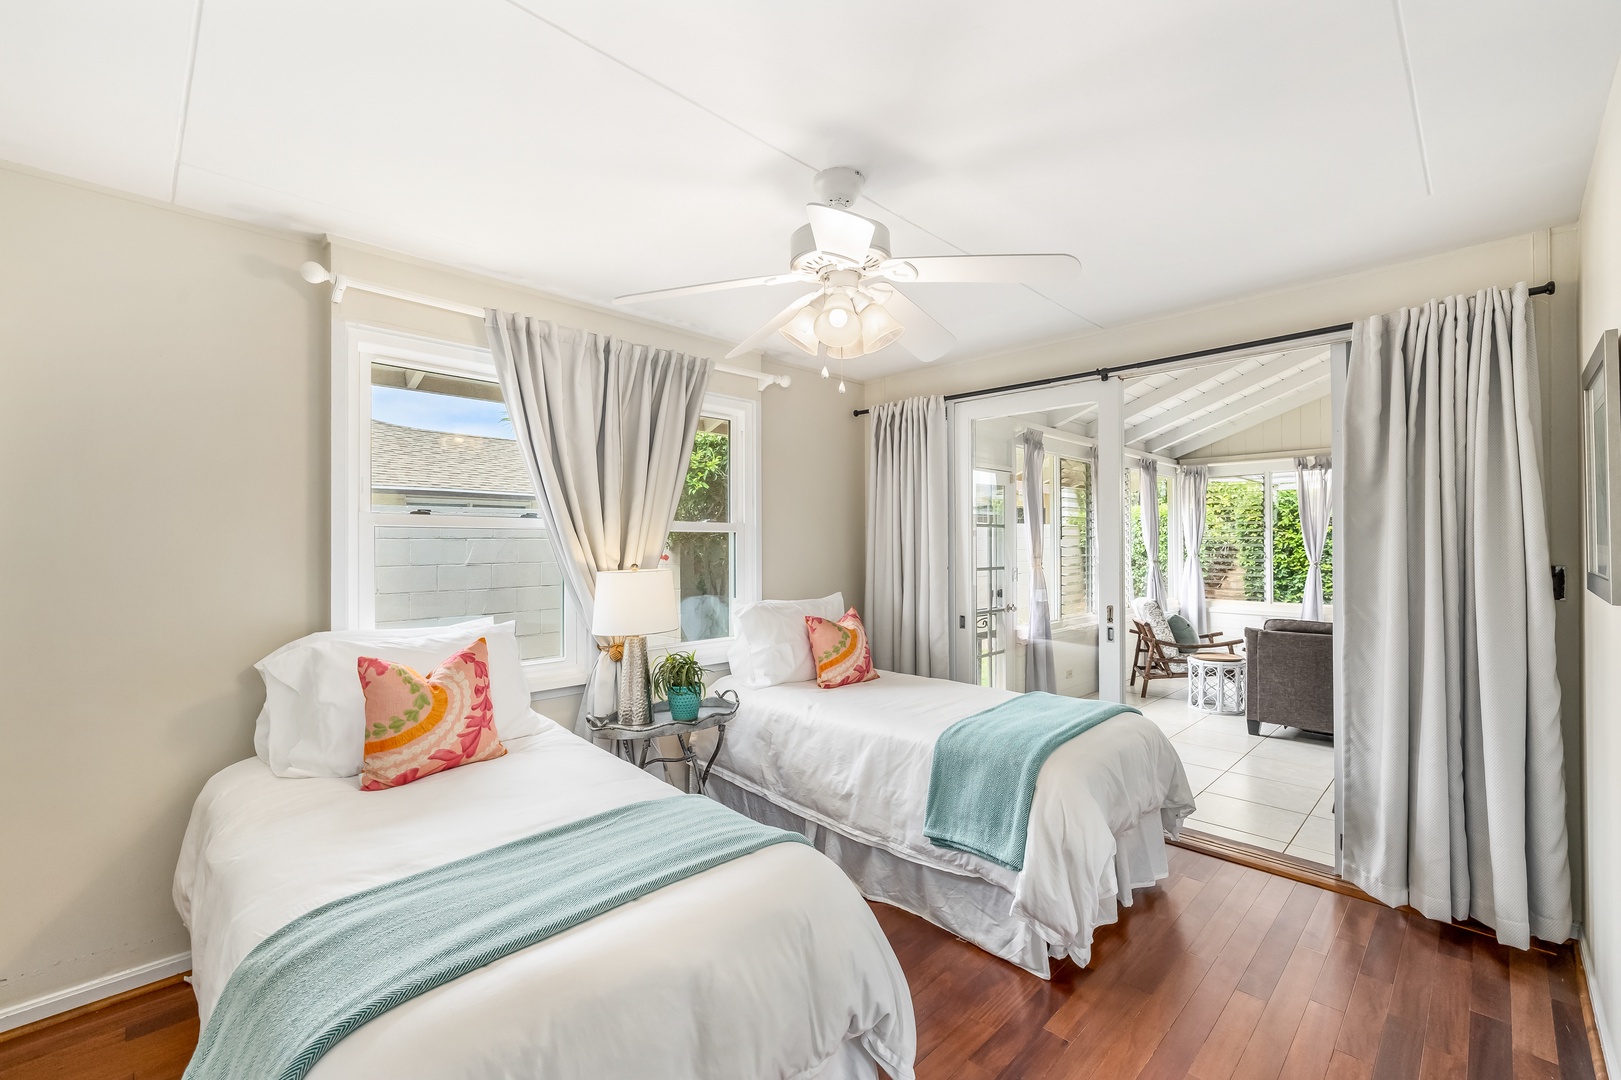 Honolulu Vacation Rentals, Kahala Cottage - With lovely natural lighting and sliders to the lanai, the guest bedroom is a relaxing space.